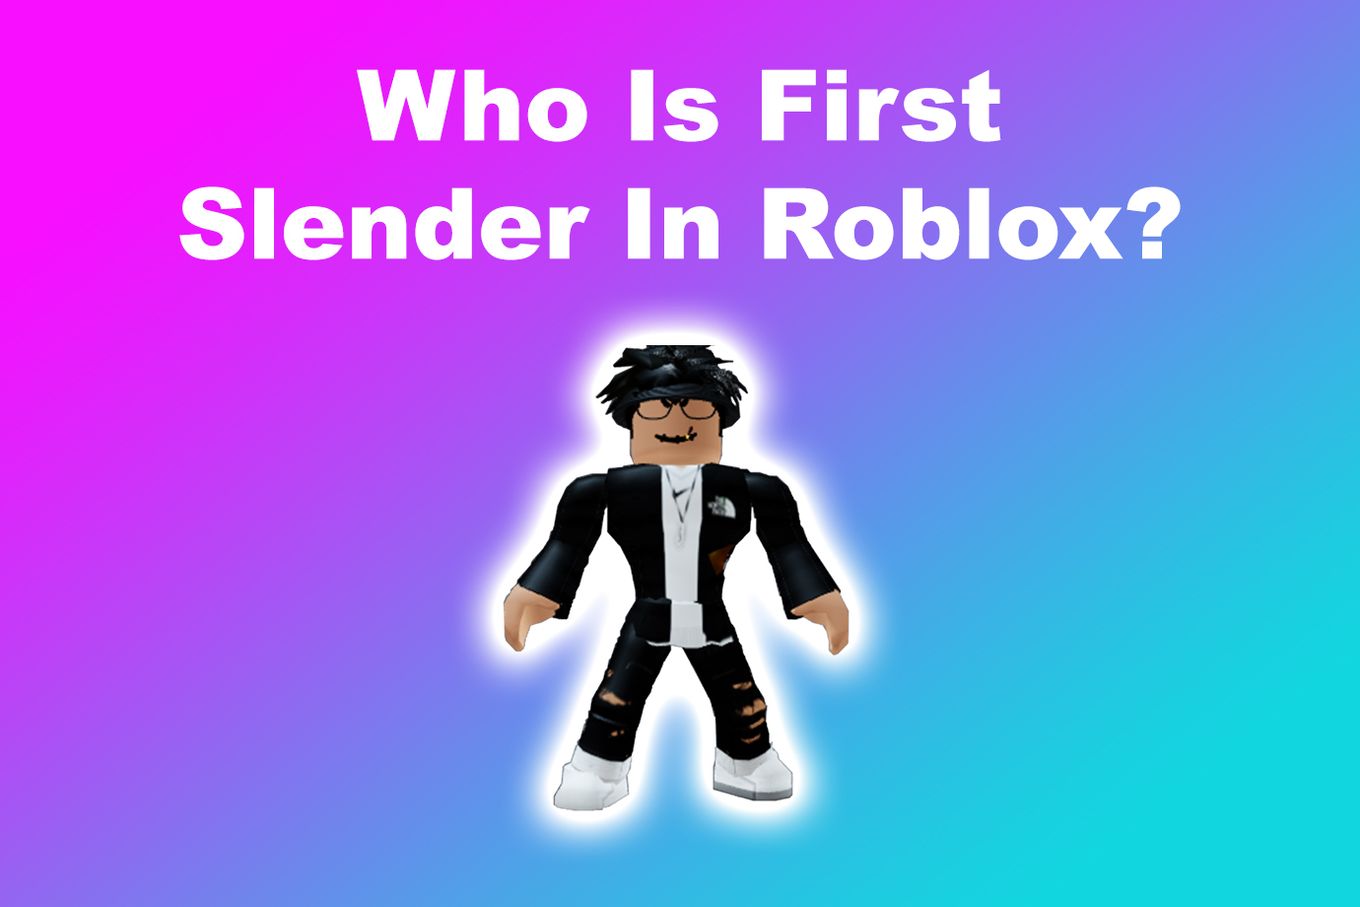 Who Is First Slender In Roblox?